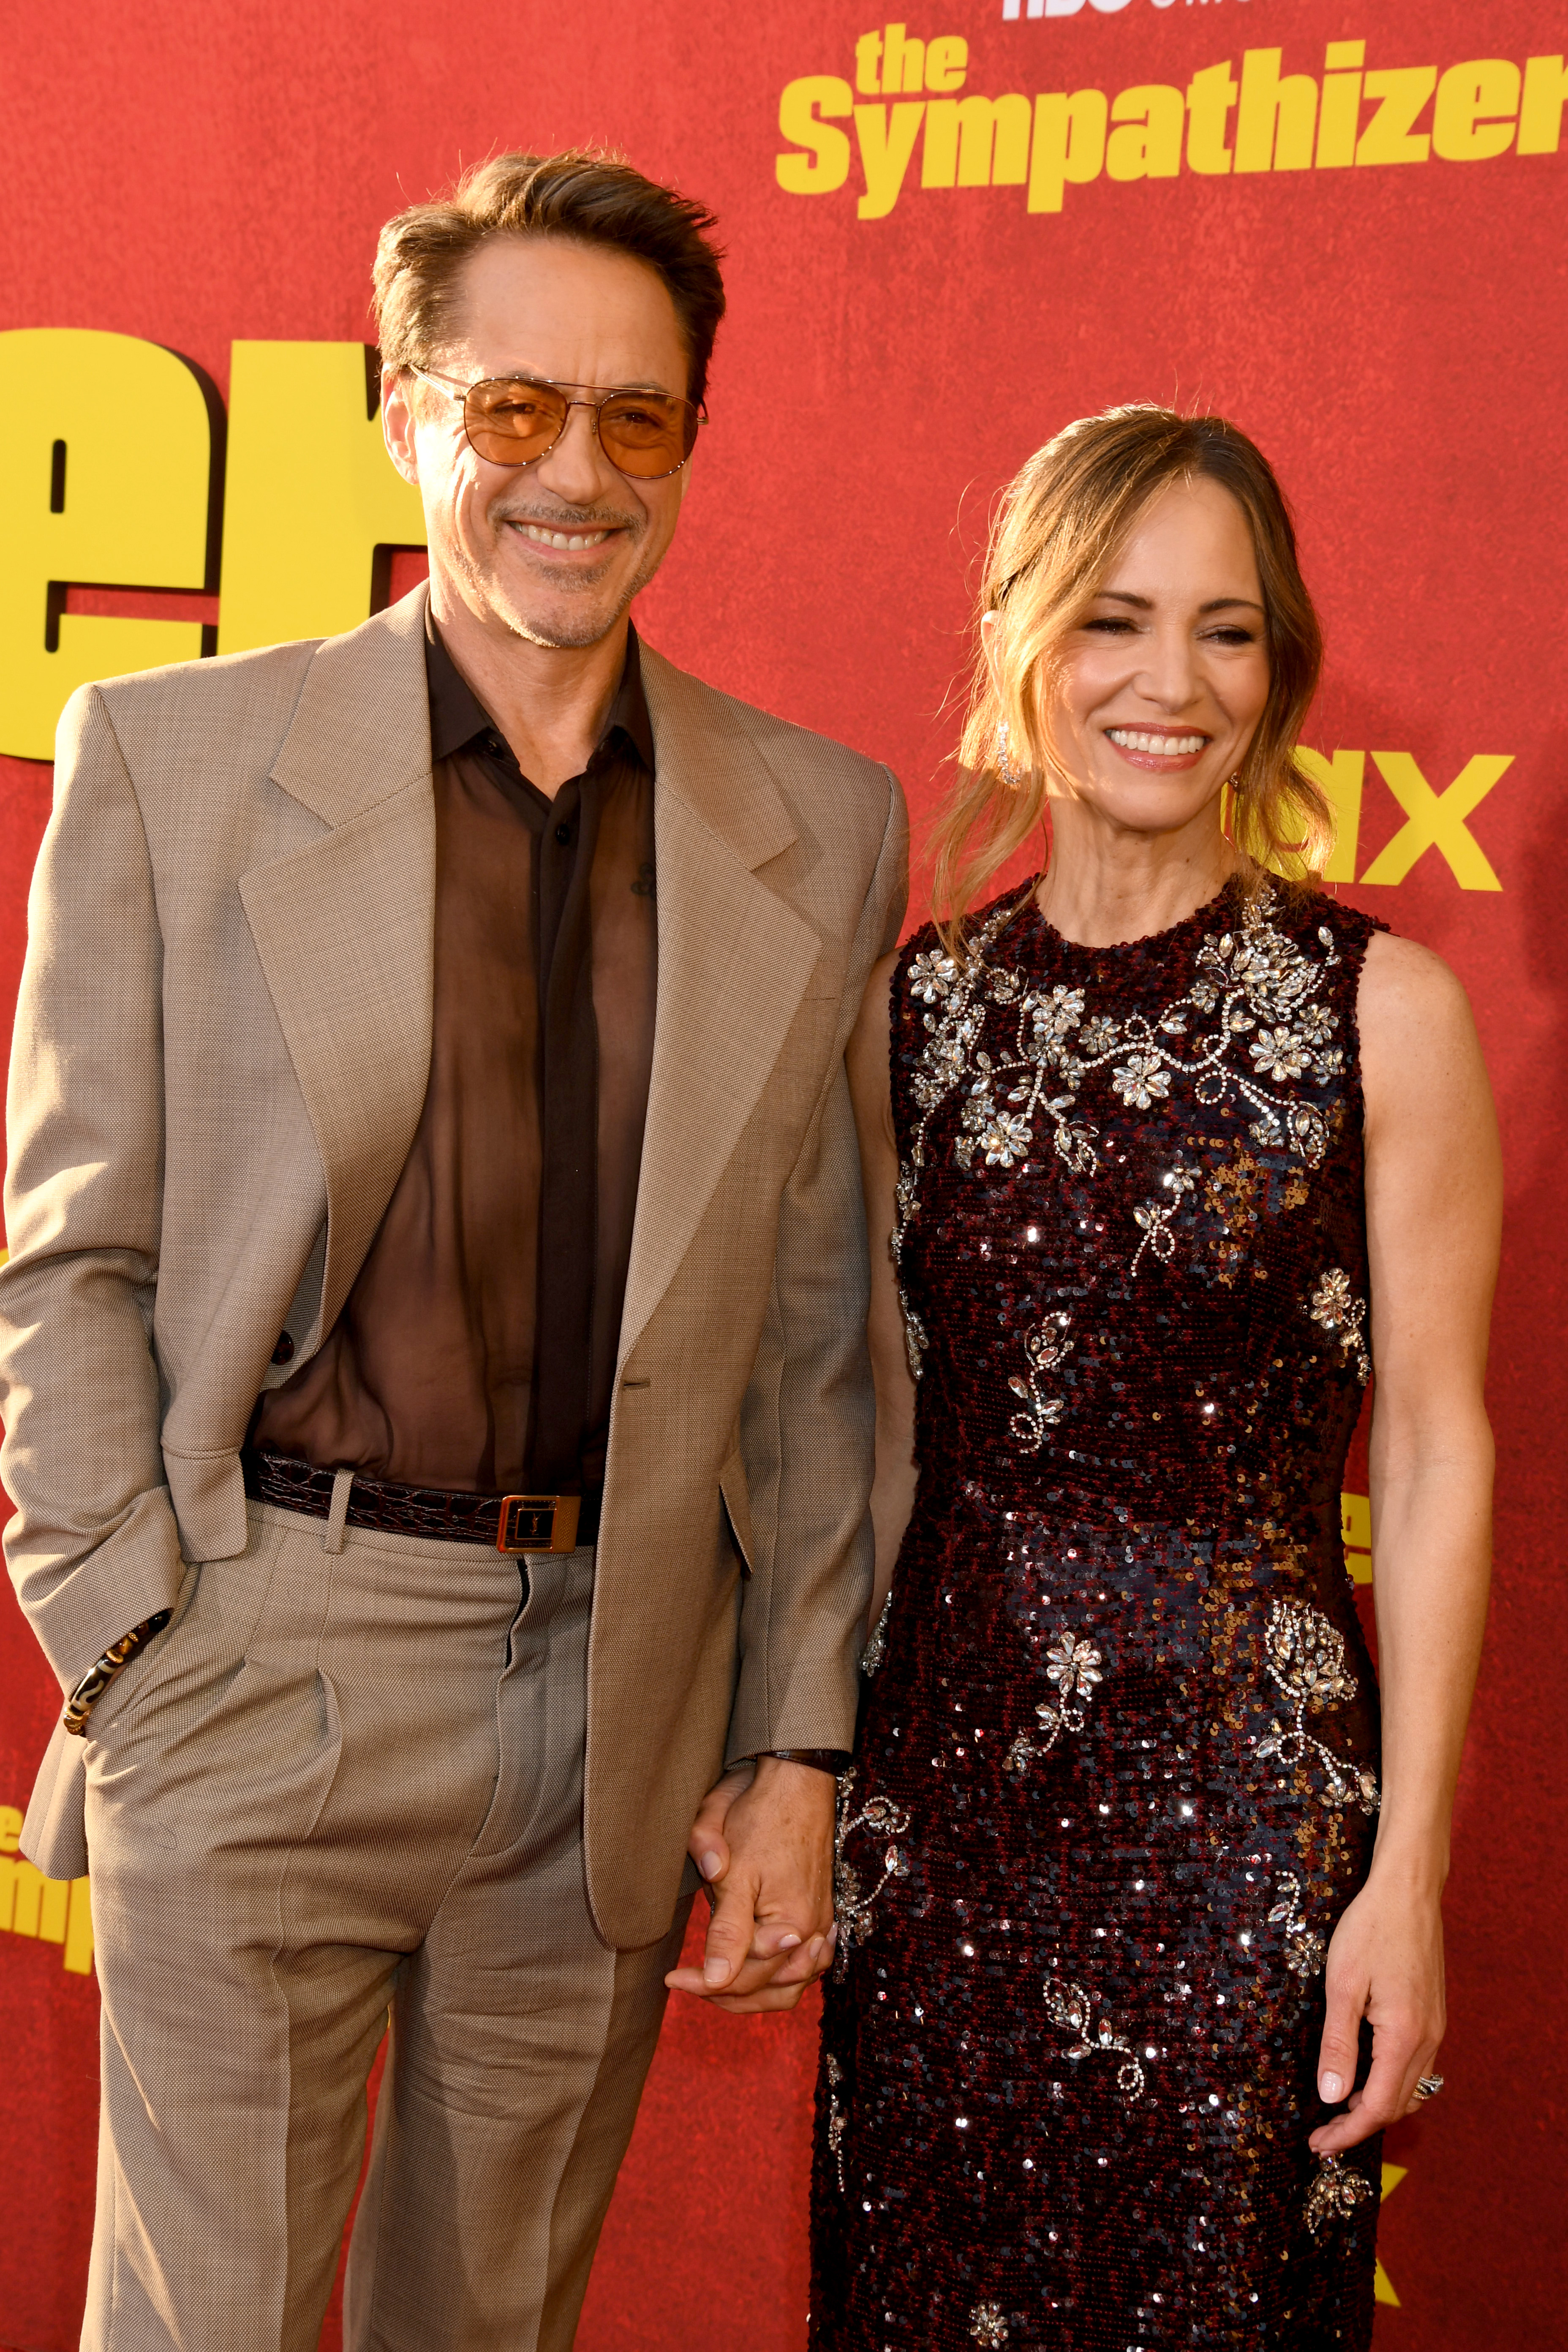 The actor's wife, Susan Downey, is an executive producer on the show